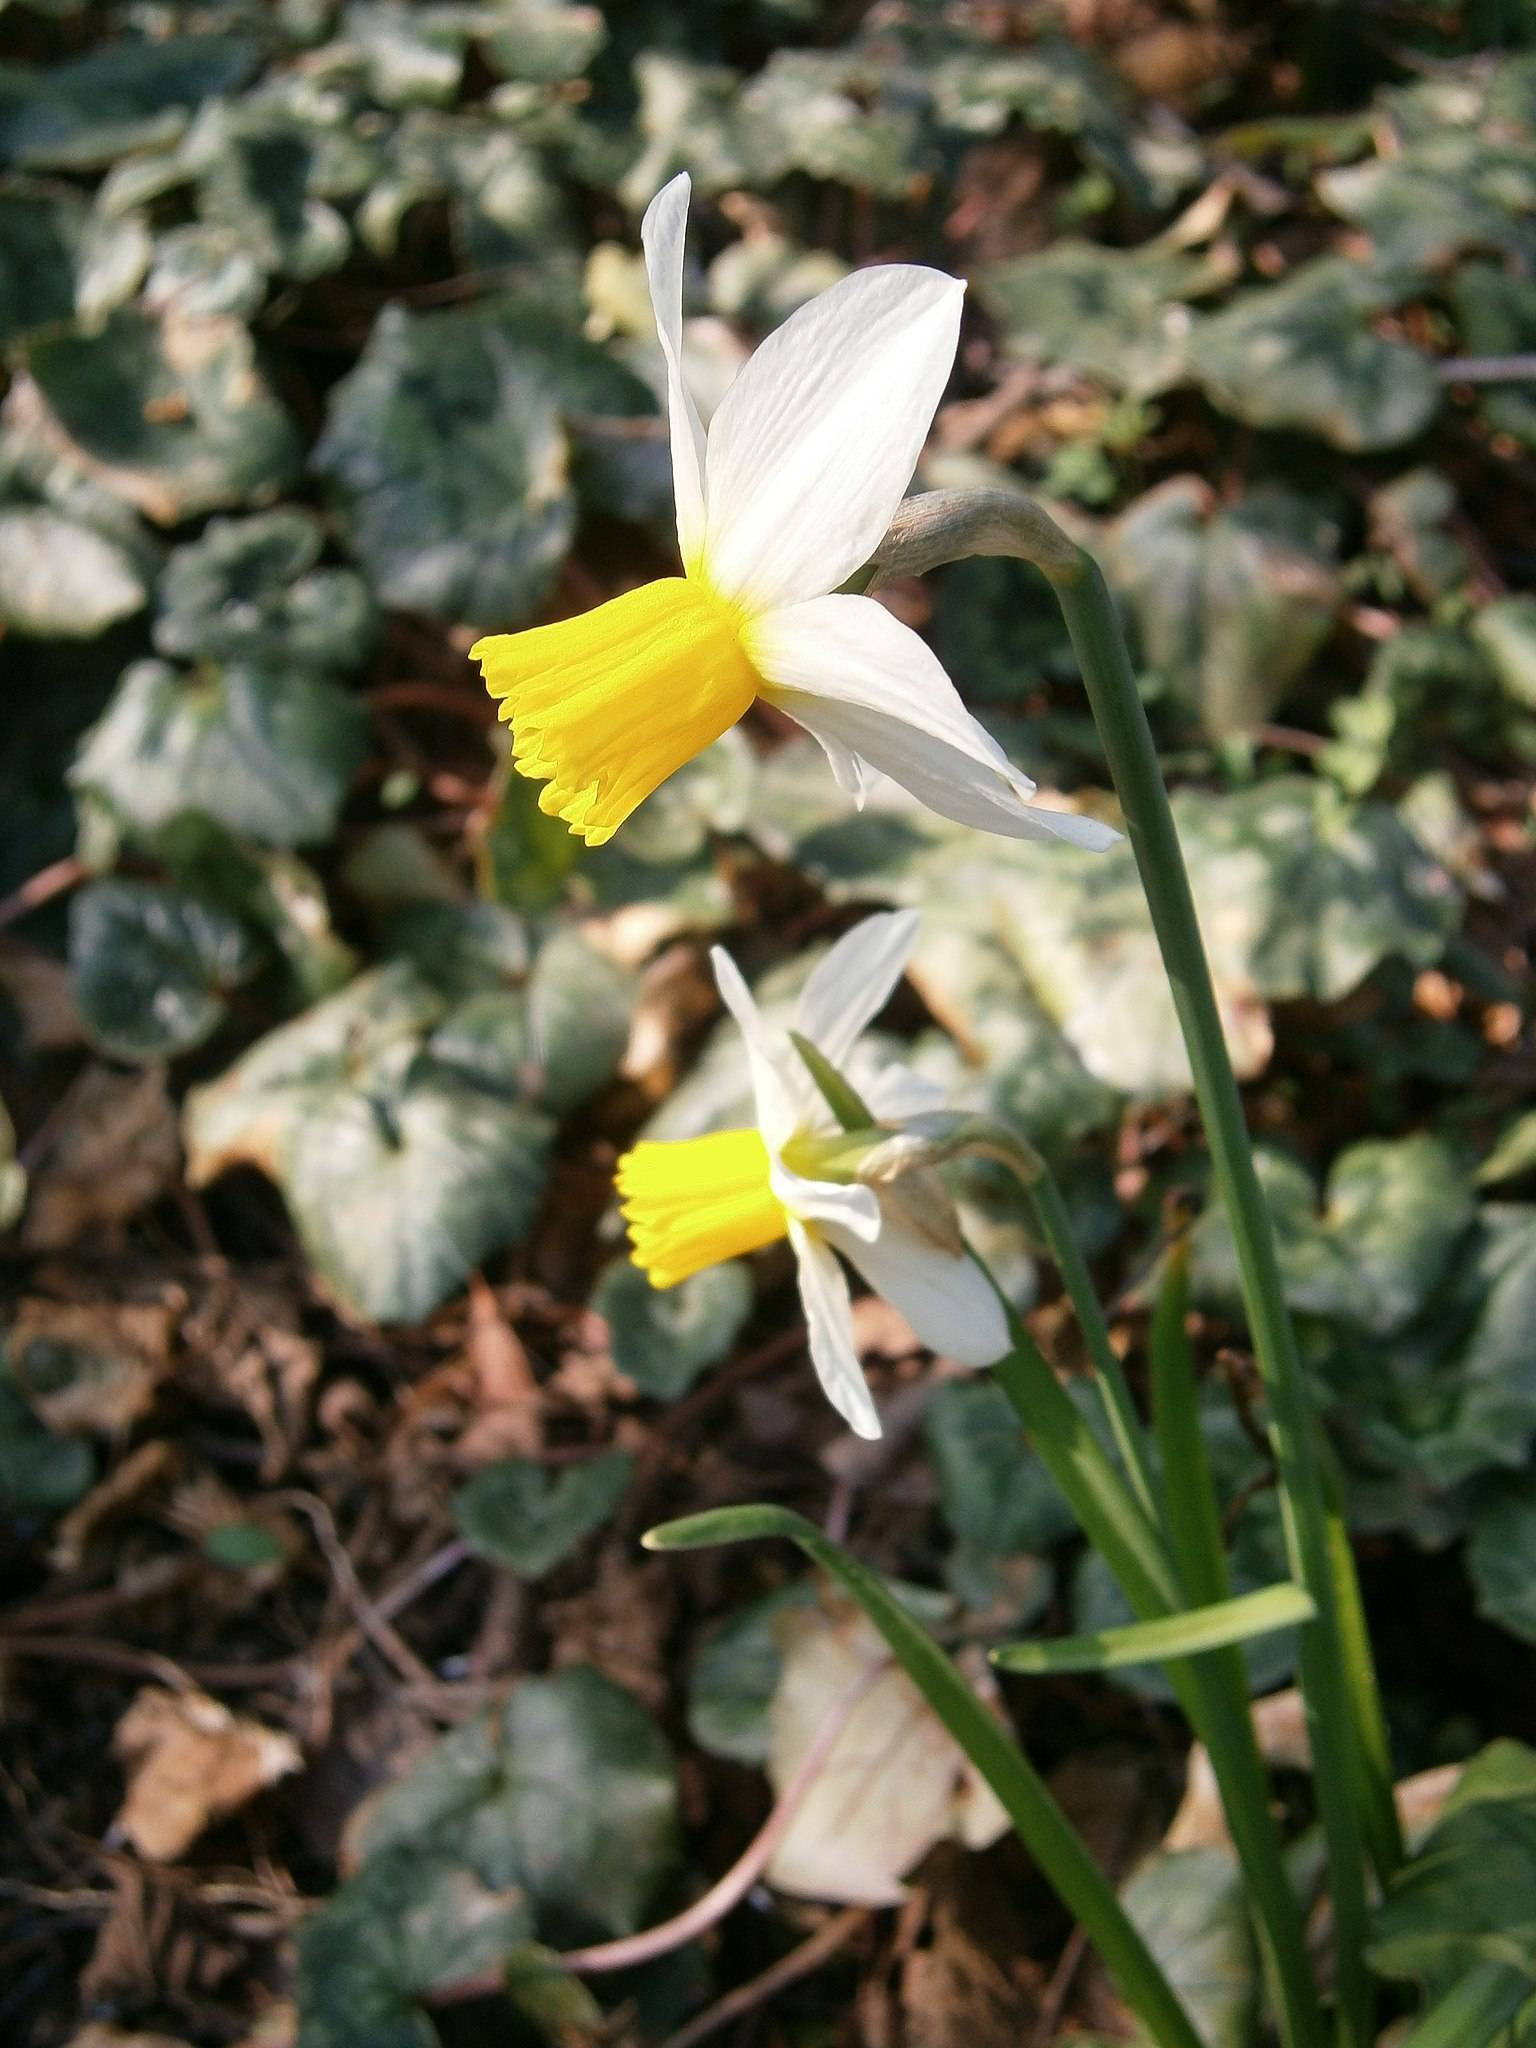 yellow-white flowers with green leaves and stems